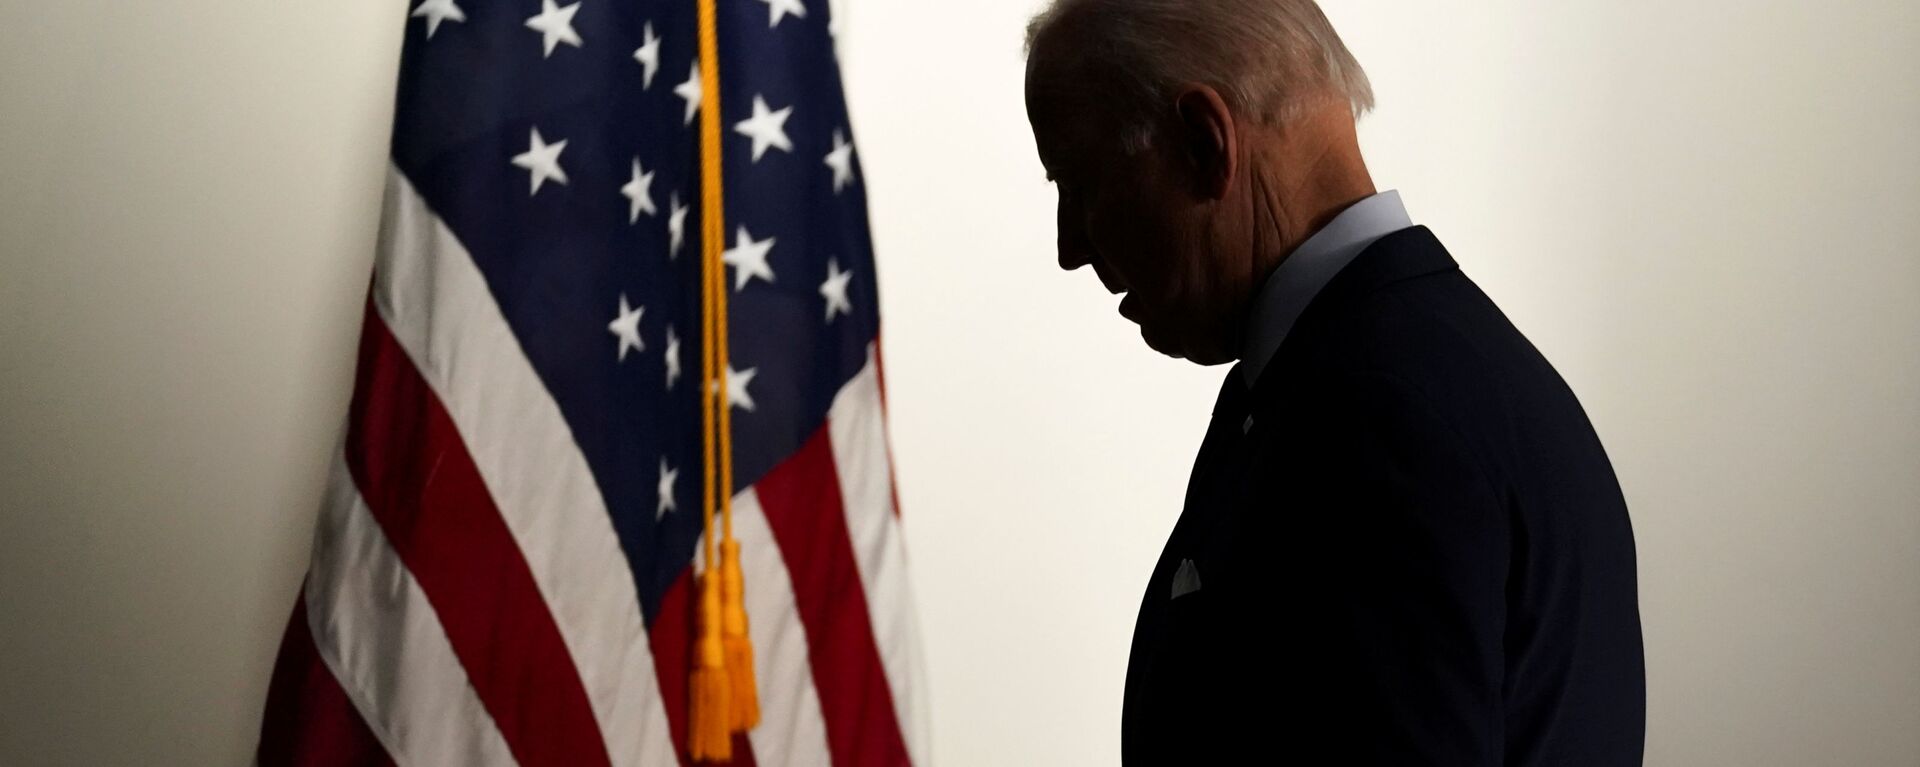 U.S. President Joe Biden departs the room after speaking about jobs and the economy at the White House in Washington, U.S., April 7, 2021. - Sputnik International, 1920, 02.07.2021